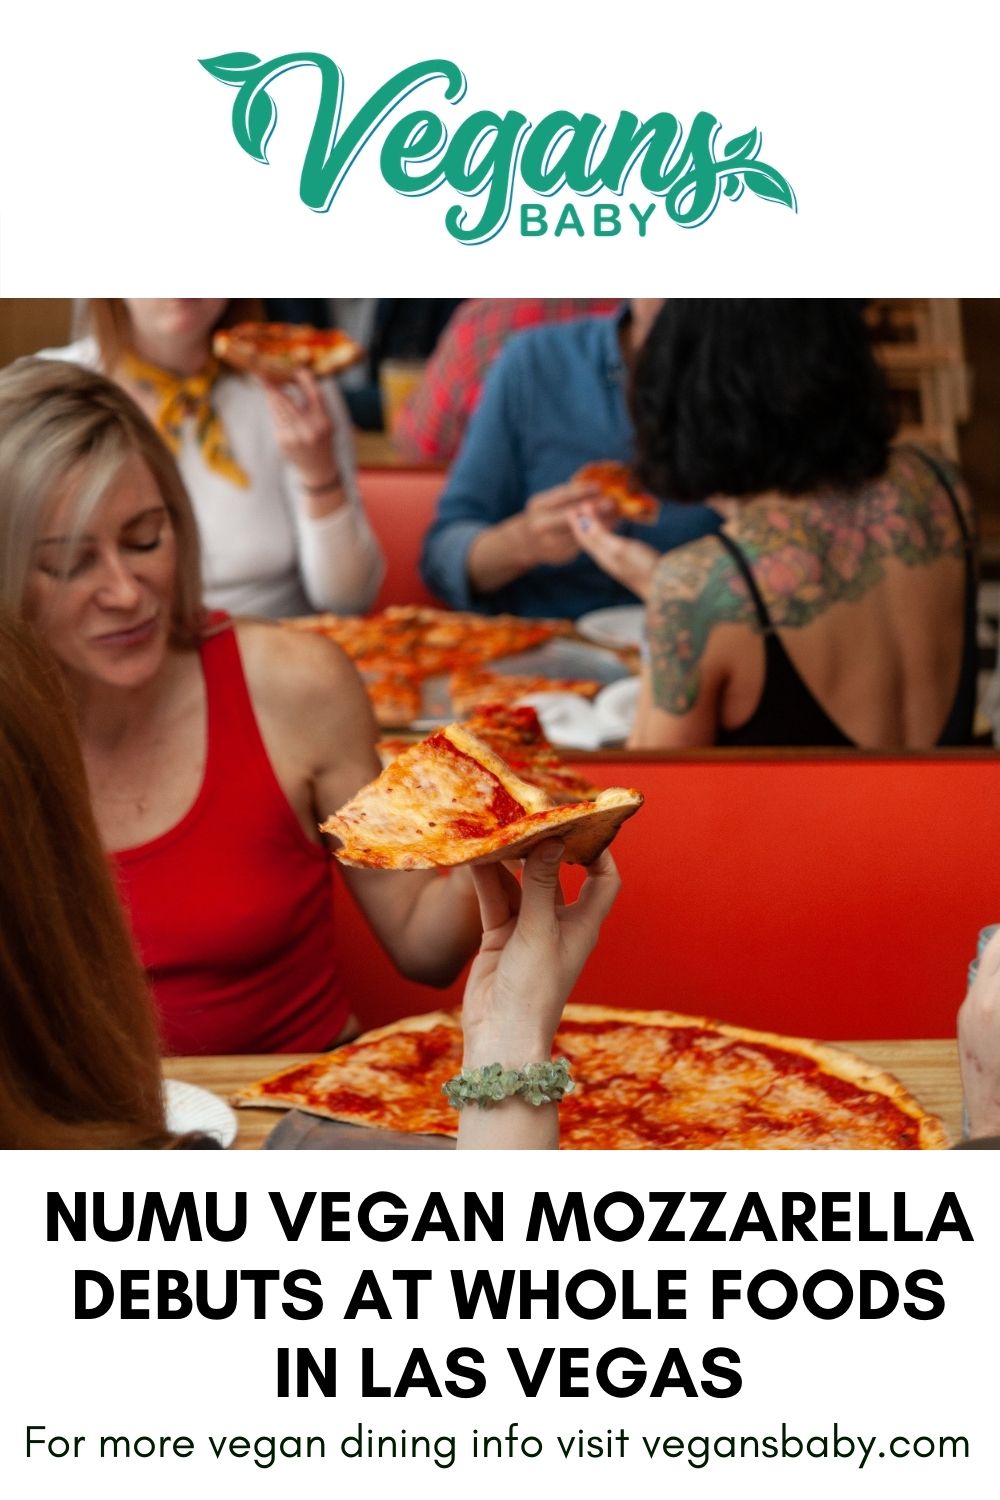 Numu Vegan mozzarella is in Whole Foods South Pacific region stores in the pizza bar. For more vegan dining visit www.vegansbaby.com